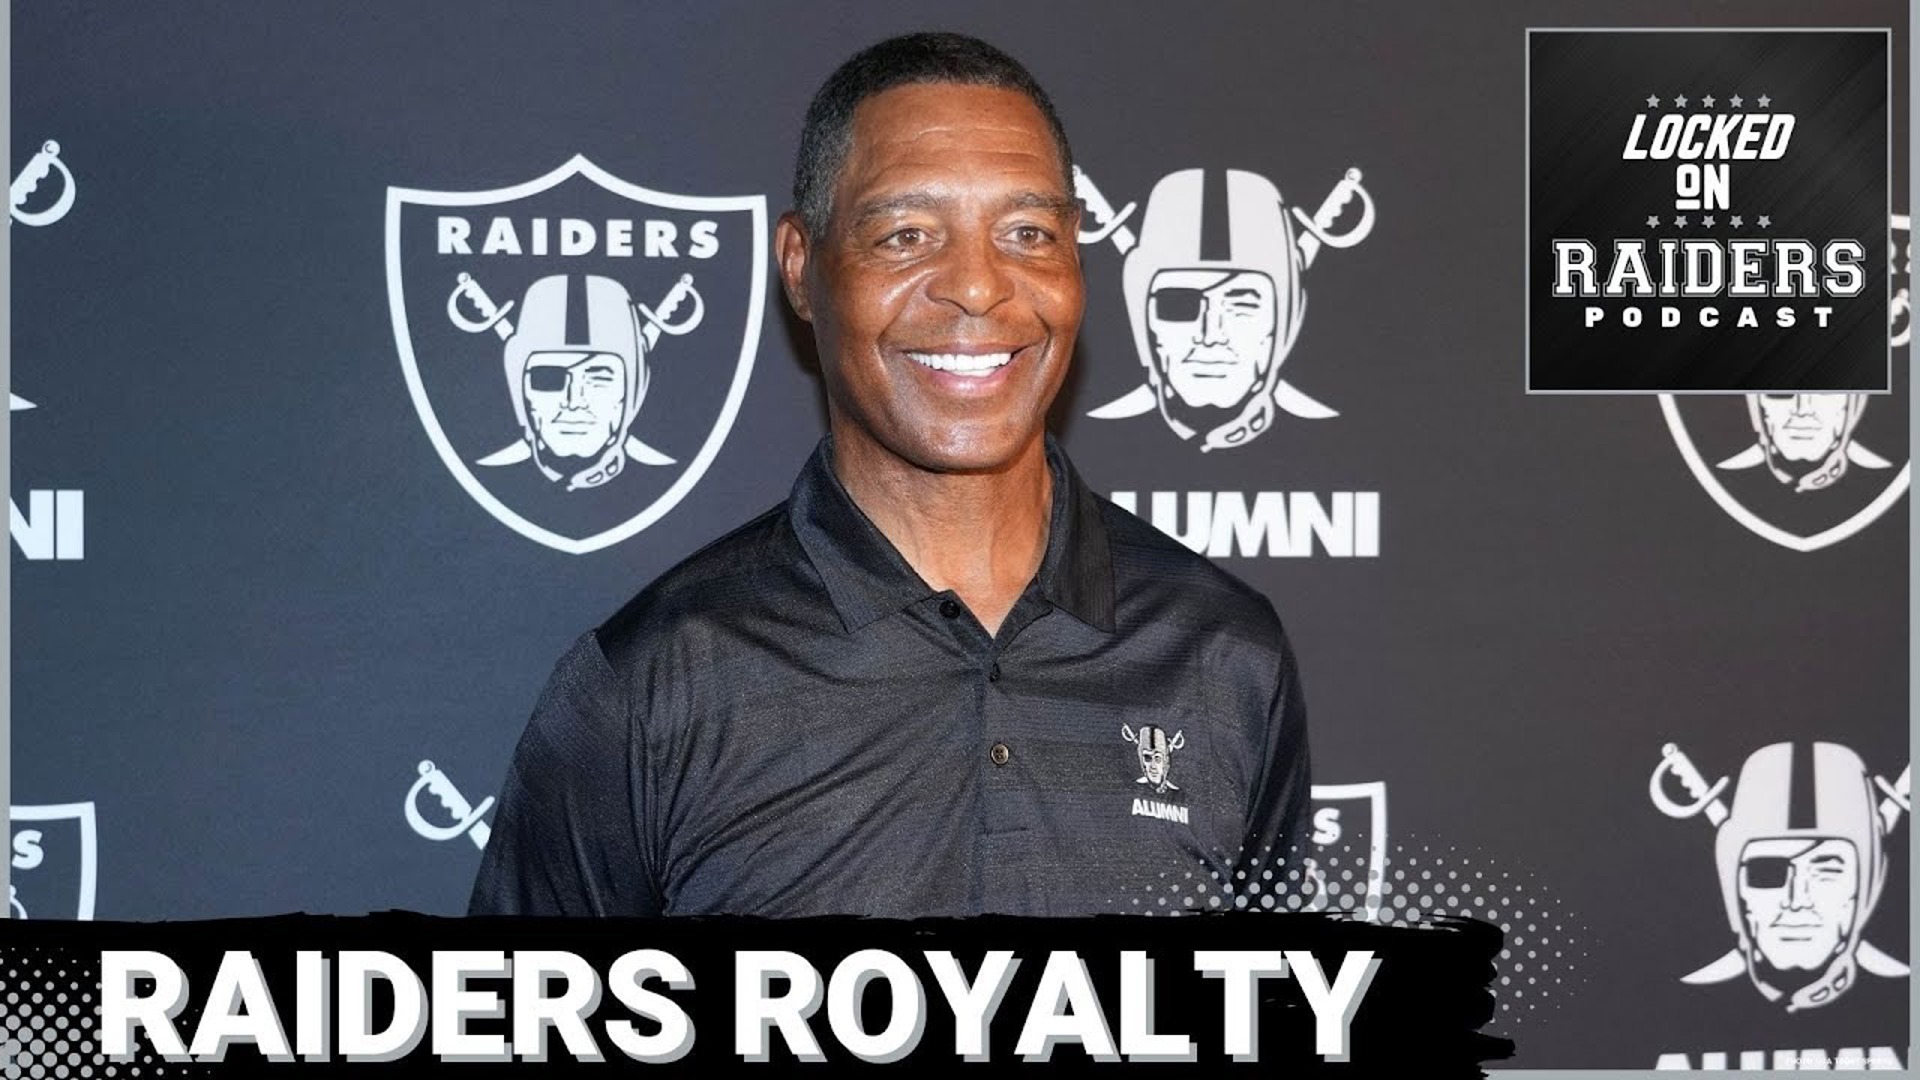 As my Best of series continues while I am on vacation, you will hear from former Raiders WR/KR Ira Matthews who held a KR record for Monday Night Football.